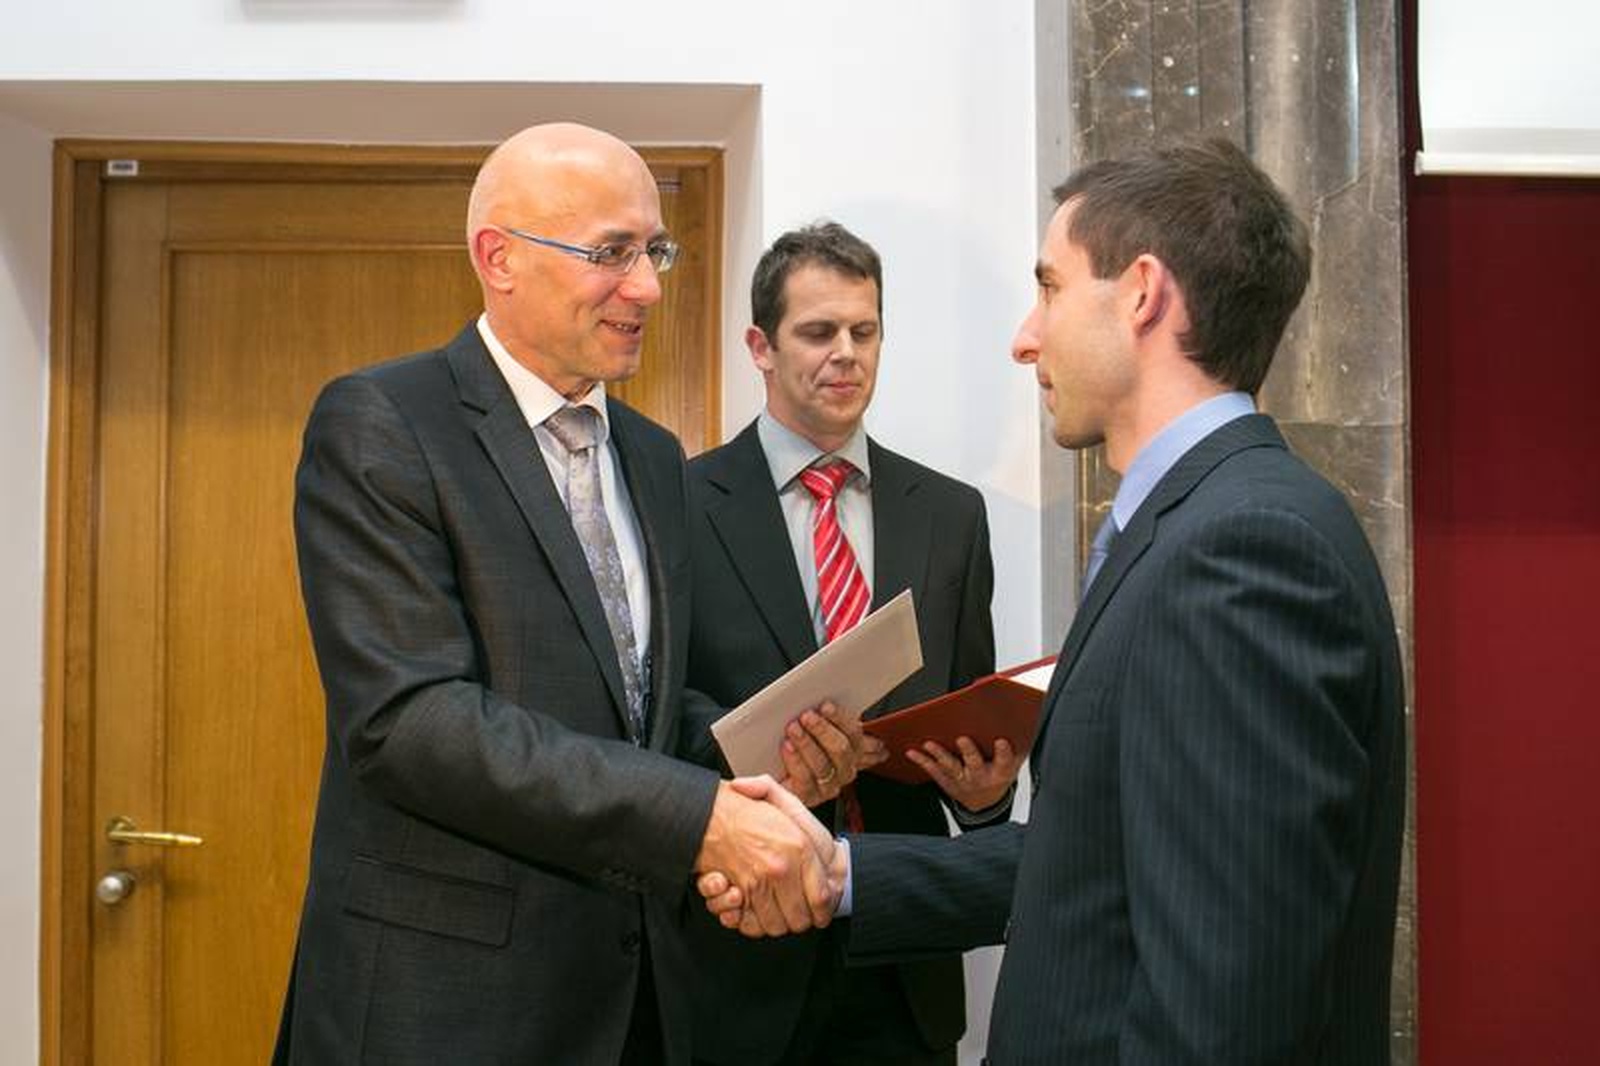 A Staff Member at the University of Nova Gorica received Pregel Award for his Exceptional Doctoral Work